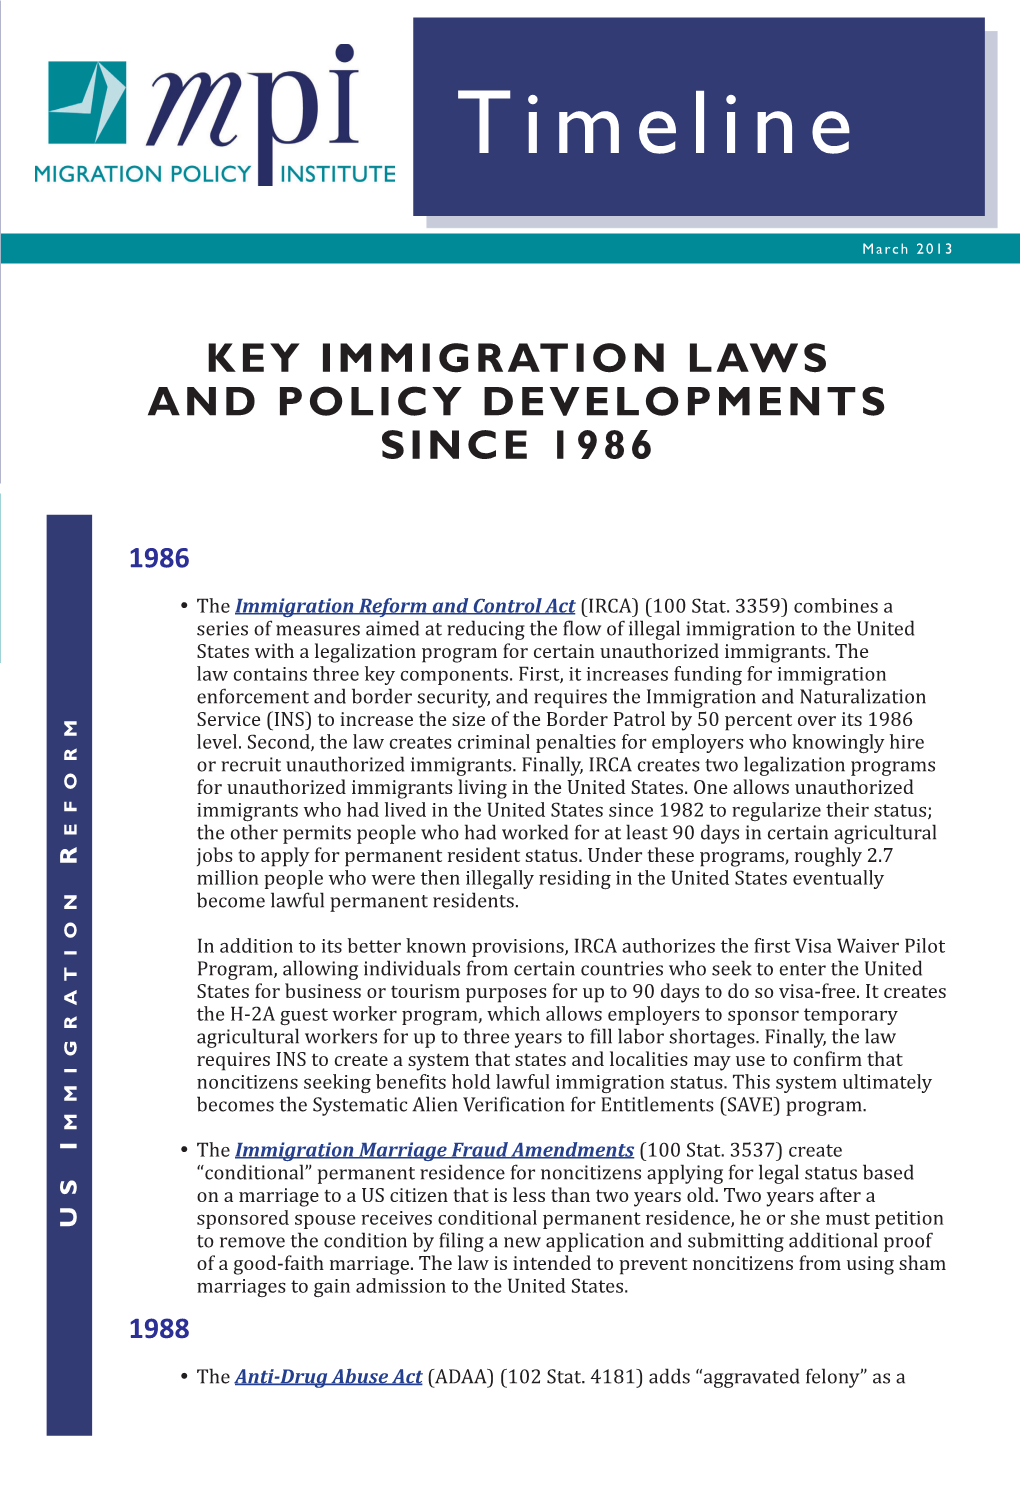 Key Immigration Laws and Policy Developments Since 1986